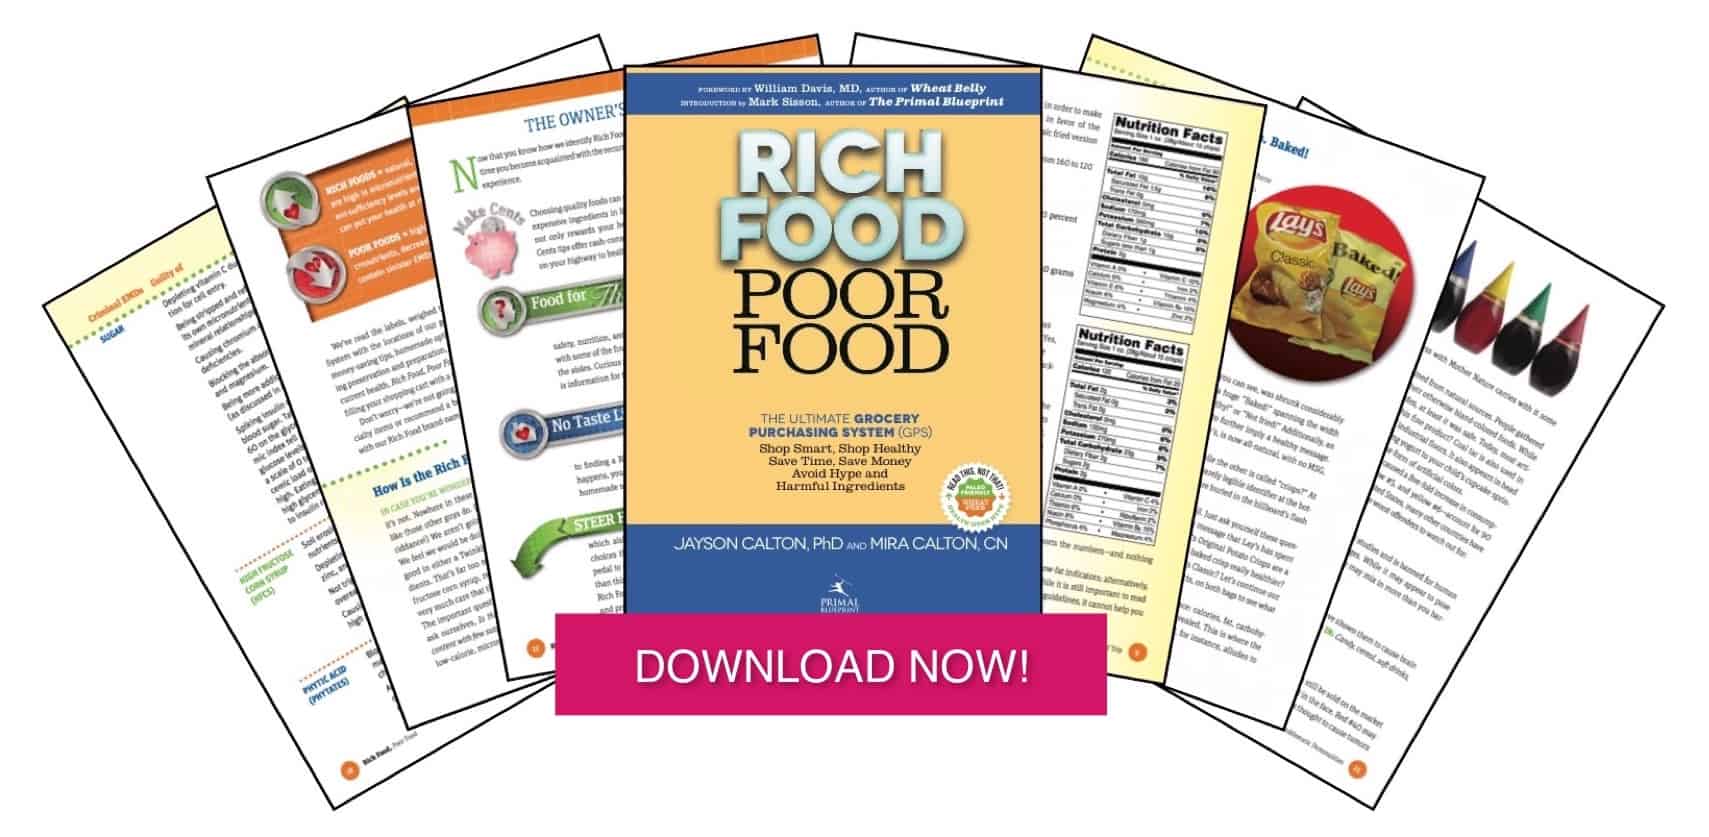 Rich Food Poor Food - The Ultimate Grocery Purchasing System